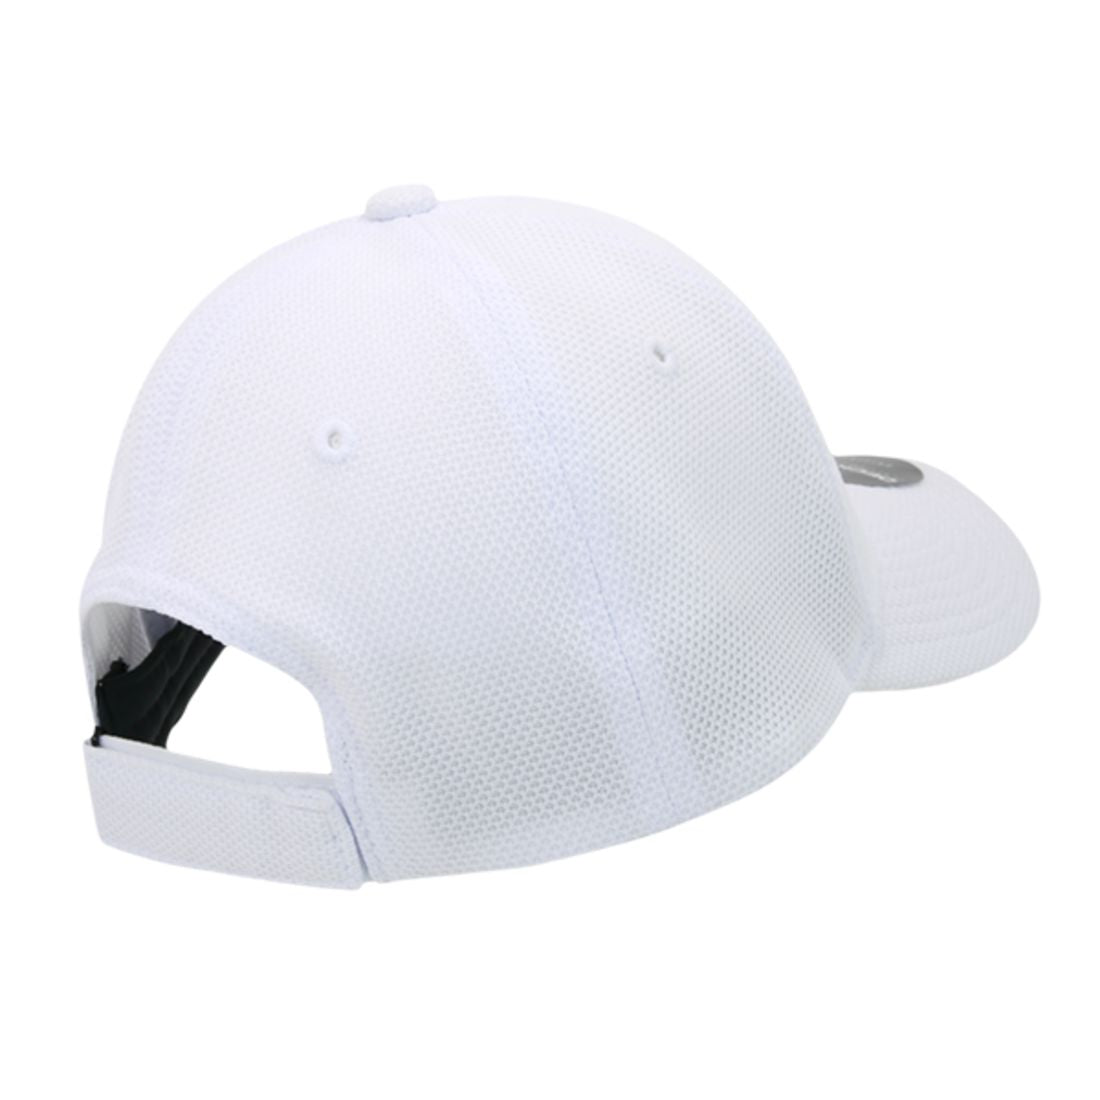 Decky 6101 Pique Pattern Low Crown Hats Golf Structured Caps 6 Panel Curved Bill Wholesale